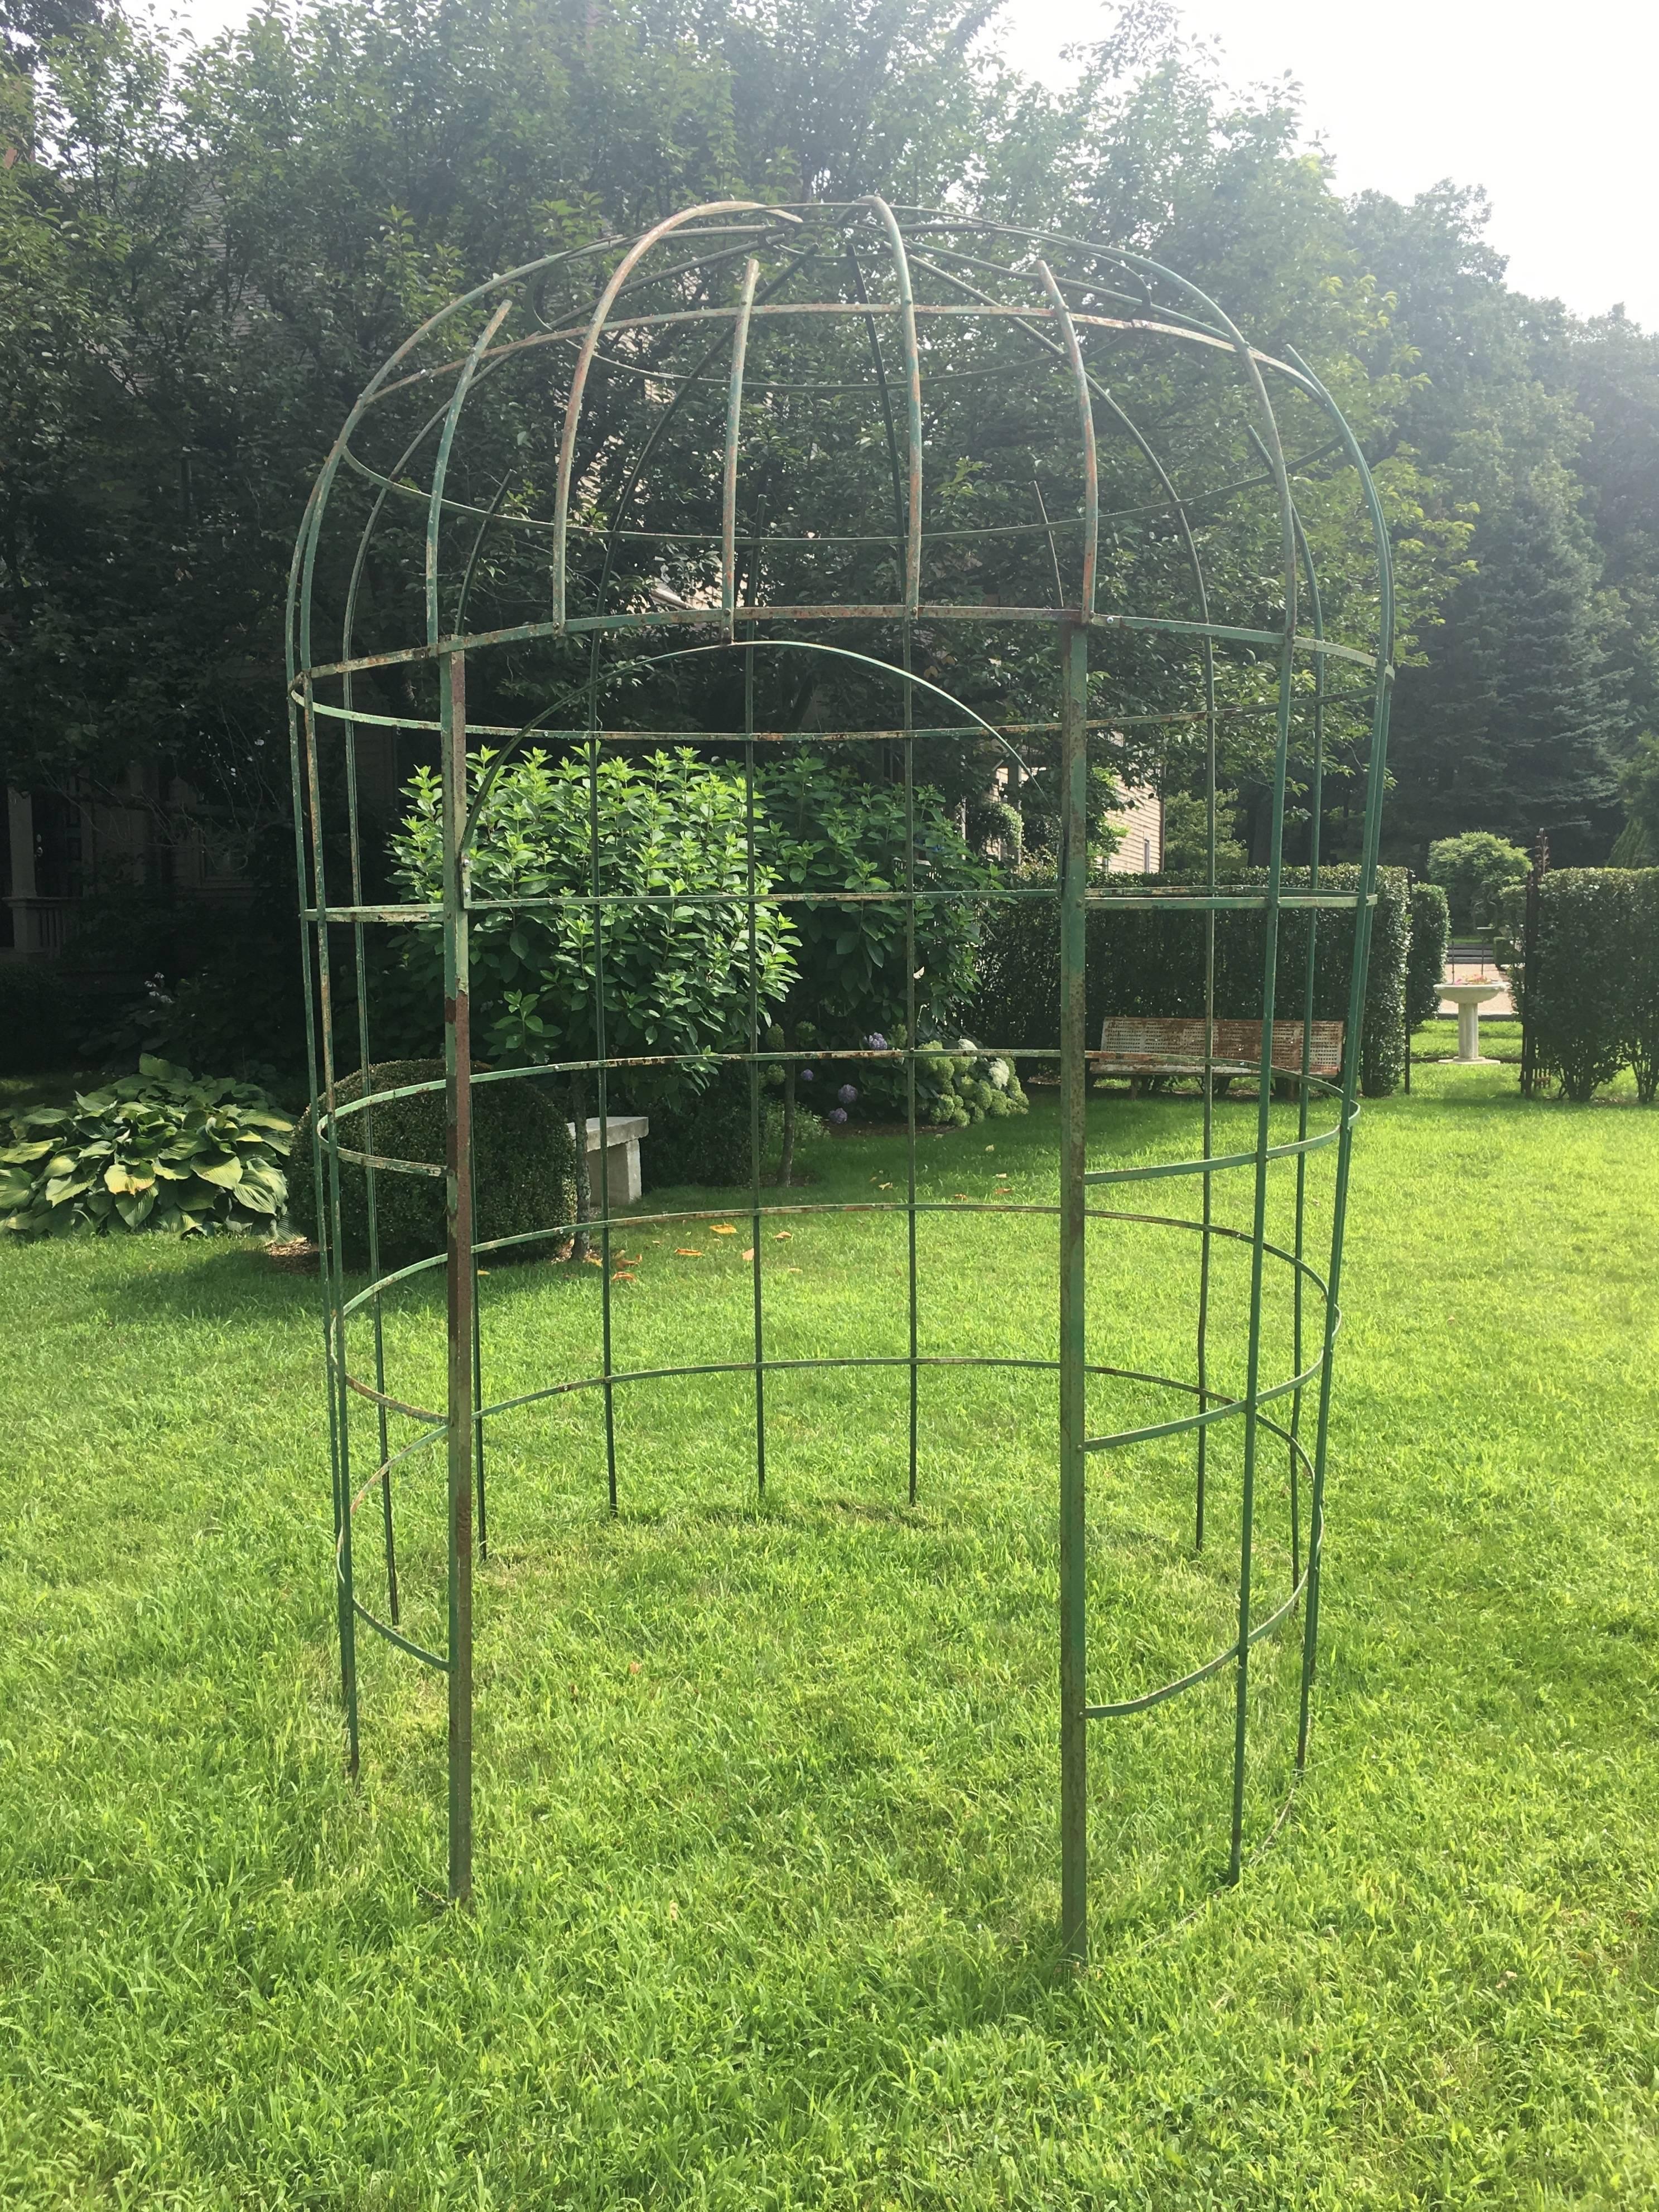 Now here is a rare piece! Handmade from wrought iron in the late 19th century, this wonderful lattice design garden structure is known in France as a Gloriette, but we call it a gazebo. This one, however, has a domed top and an open and airy design